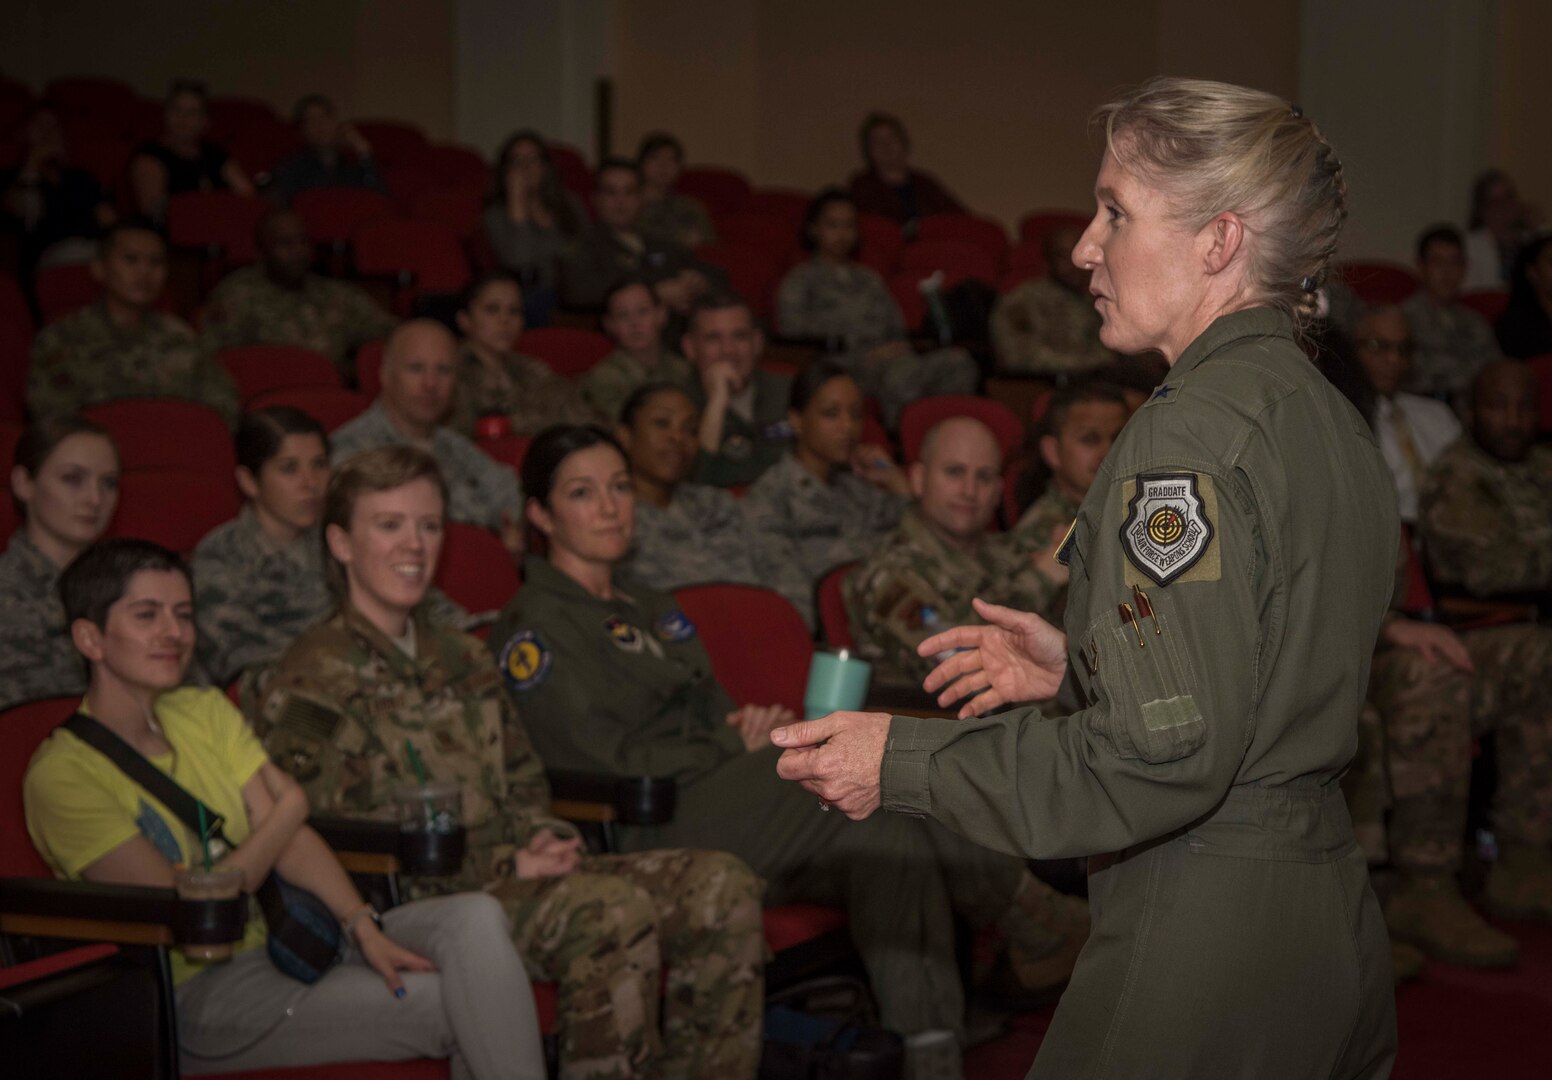 Brig. Gen. Jeannie Leavitt, commander of Air Force Recruiting Service, speaks to an audience at the Breaking Barriers event April 10, 2019, in the Fleenor Auditorium, JBSA-Randolph, about her Air Force career and leadership qualities. The purpose of this event was to provide an opportunity for the JBSA community to hear, ask questions and learn from a leader like Brig. Gen. Leavitt as she shares her story as the first female fighter pilot and the first woman to command an Air Force combat fighter wing and talks about effective leadership practices in the Air Force. (U.S. Air Force photo by: Airman 1st Class Shelby Pruitt)